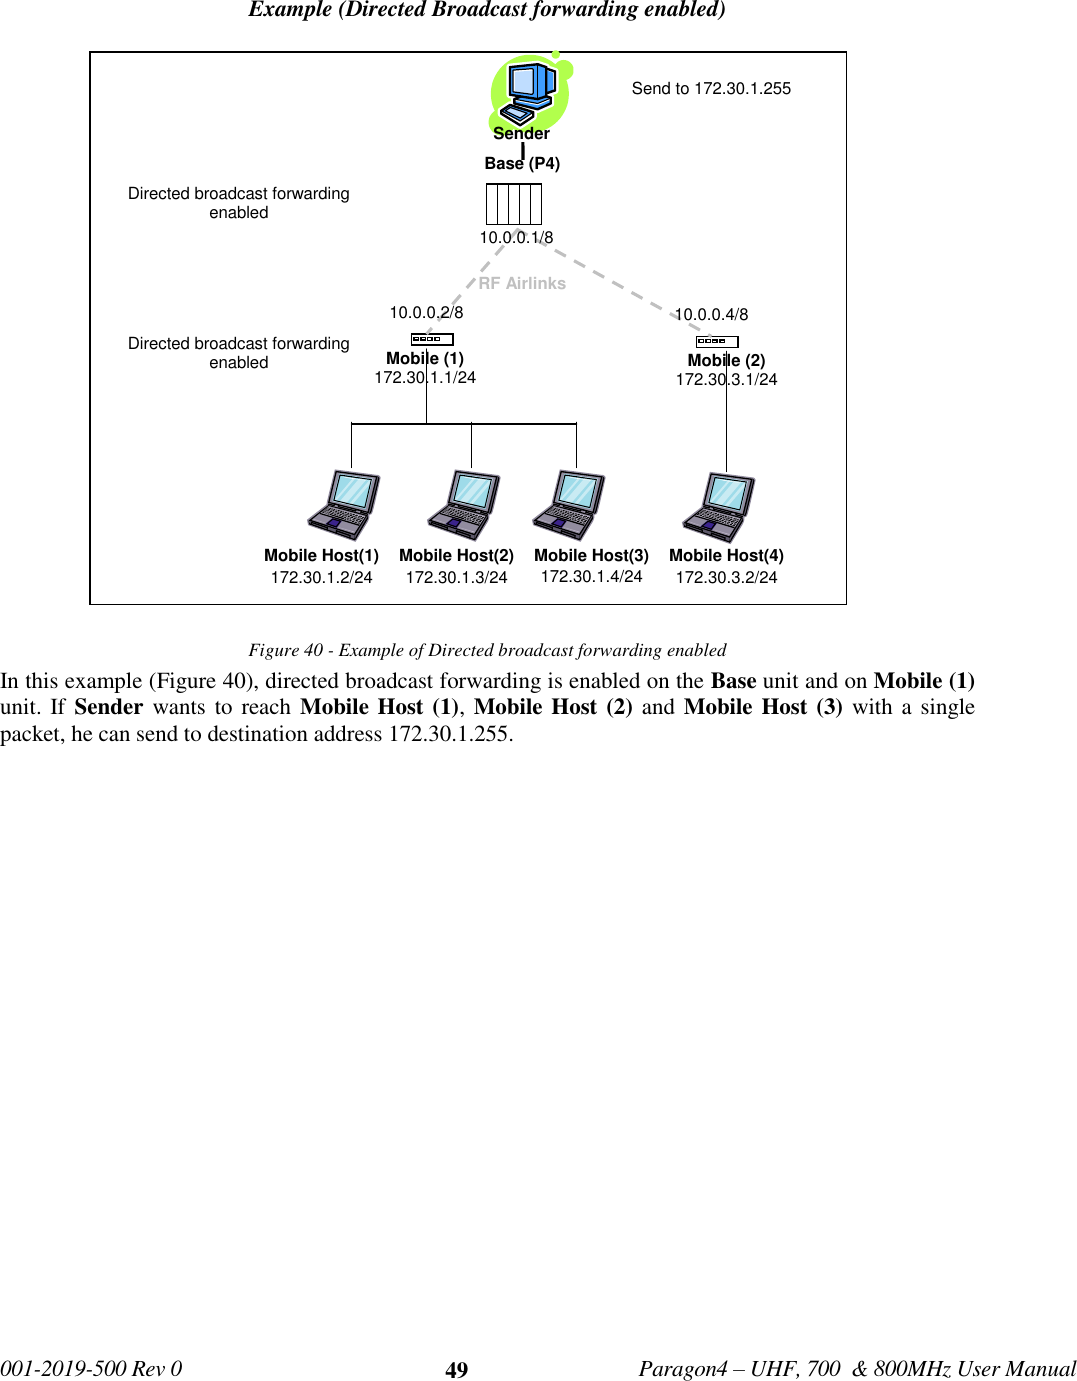   001-2019-500 Rev 0         Paragon4 – UHF, 700  &amp; 800MHz User Manual     49  Example (Directed Broadcast forwarding enabled)  Figure 40 - Example of Directed broadcast forwarding enabled In this example (Figure 40), directed broadcast forwarding is enabled on the Base unit and on Mobile (1) unit. If Sender wants to  reach Mobile Host (1), Mobile Host (2) and Mobile Host (3)  with a single packet, he can send to destination address 172.30.1.255.                Sender  Base (P4) RF Airlinks Mobile Host(2) 172.30.1.3/24 Mobile Host(3) 172.30.1.4/24 Mobile (1) 172.30.1.1/24 Mobile (2) 172.30.3.1/24 Mobile Host(1) 172.30.1.2/24 Mobile Host(4) 172.30.3.2/24 Directed broadcast forwarding enabled Directed broadcast forwarding enabled Send to 172.30.1.255 10.0.0.1/8 10.0.0.2/8 10.0.0.4/8 